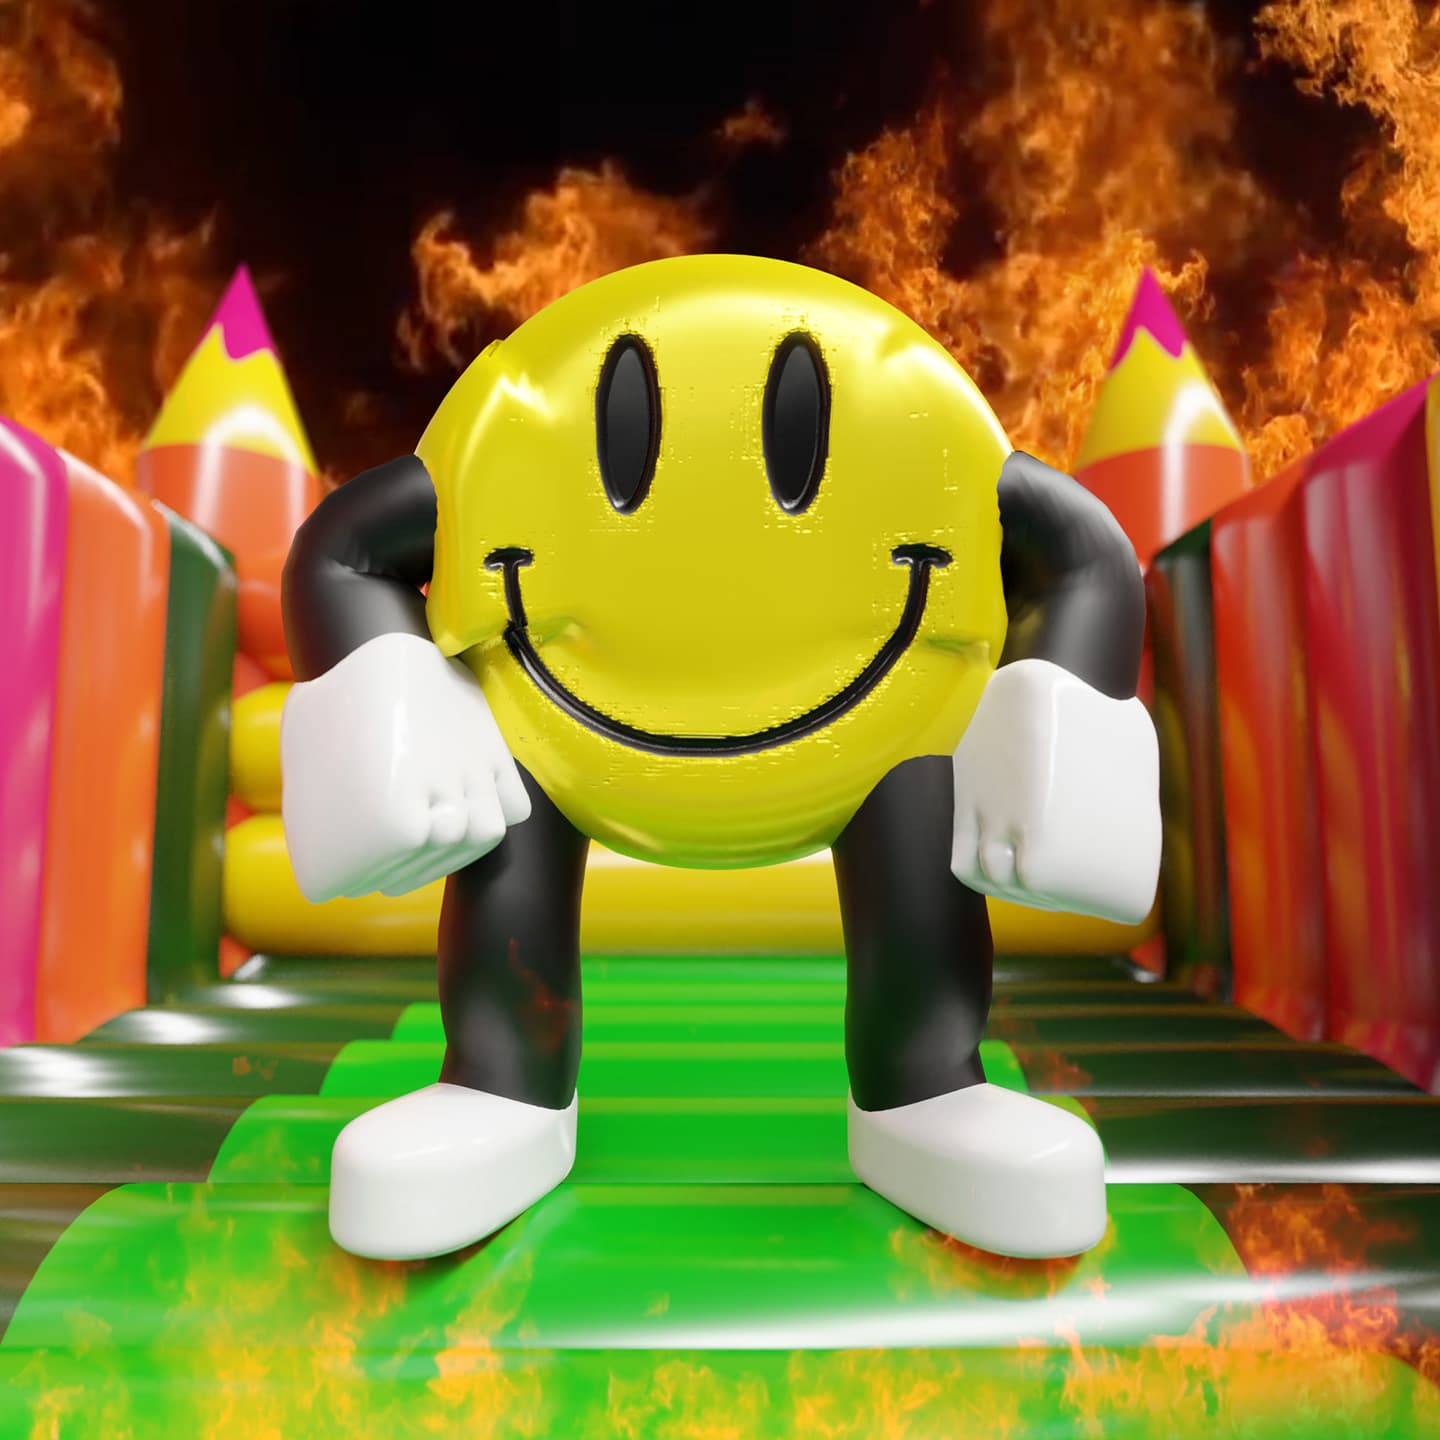 CGI image close-up of a smiley faced character sitting in an inflatable castle surrounded by flames